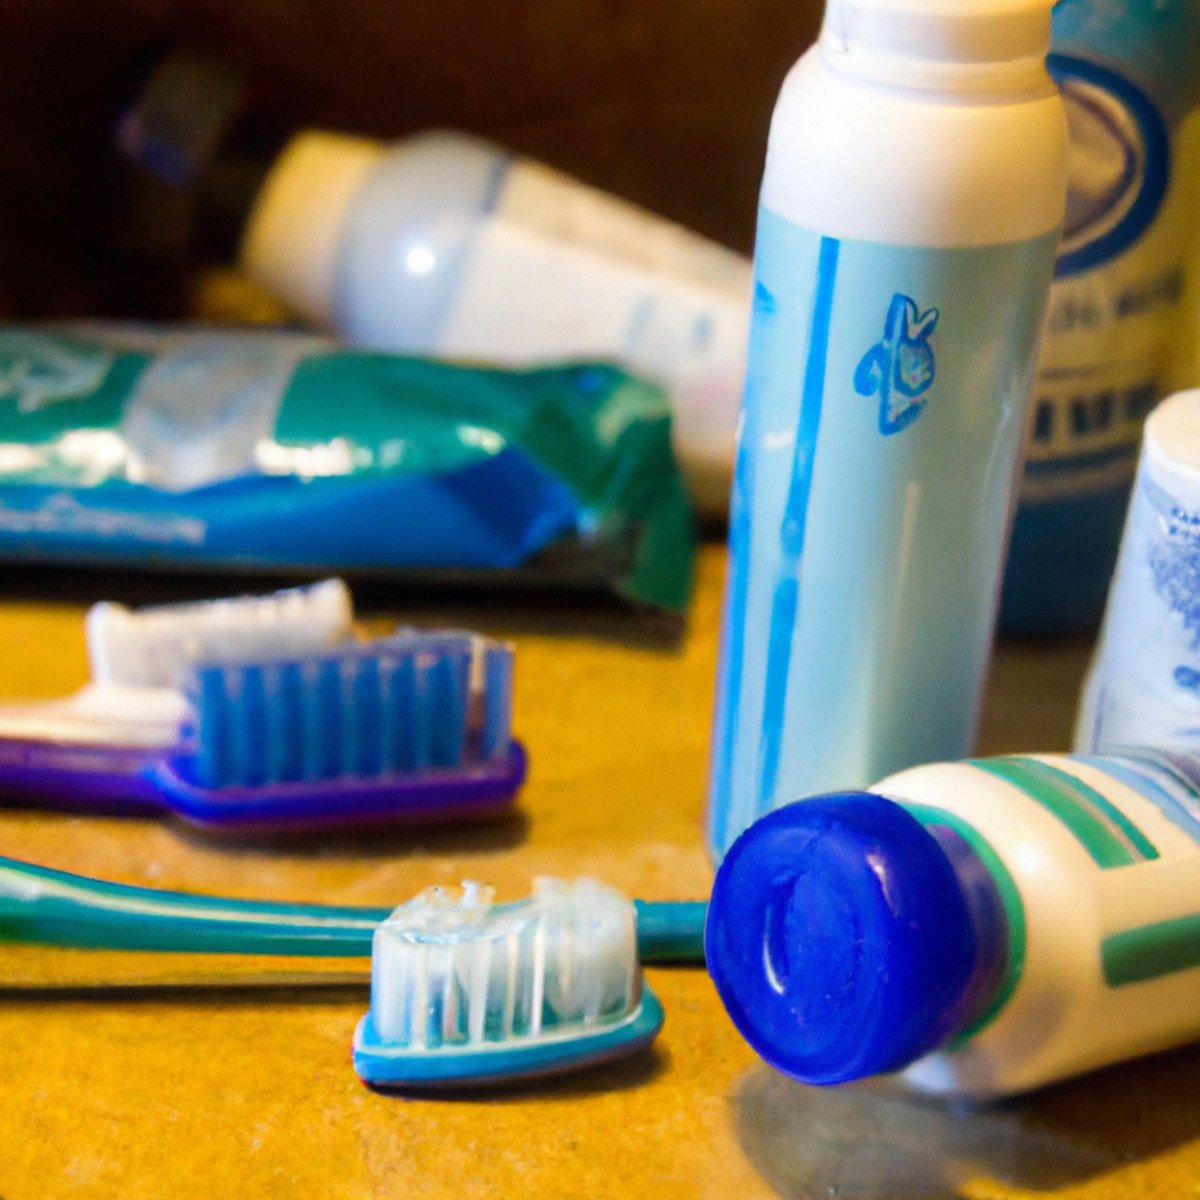 Self-care essentials for individuals with Hypohidrotic Ectodermal Dysplasia: toothbrush, toothpaste, hairbrush, moisturizer, and glasses.